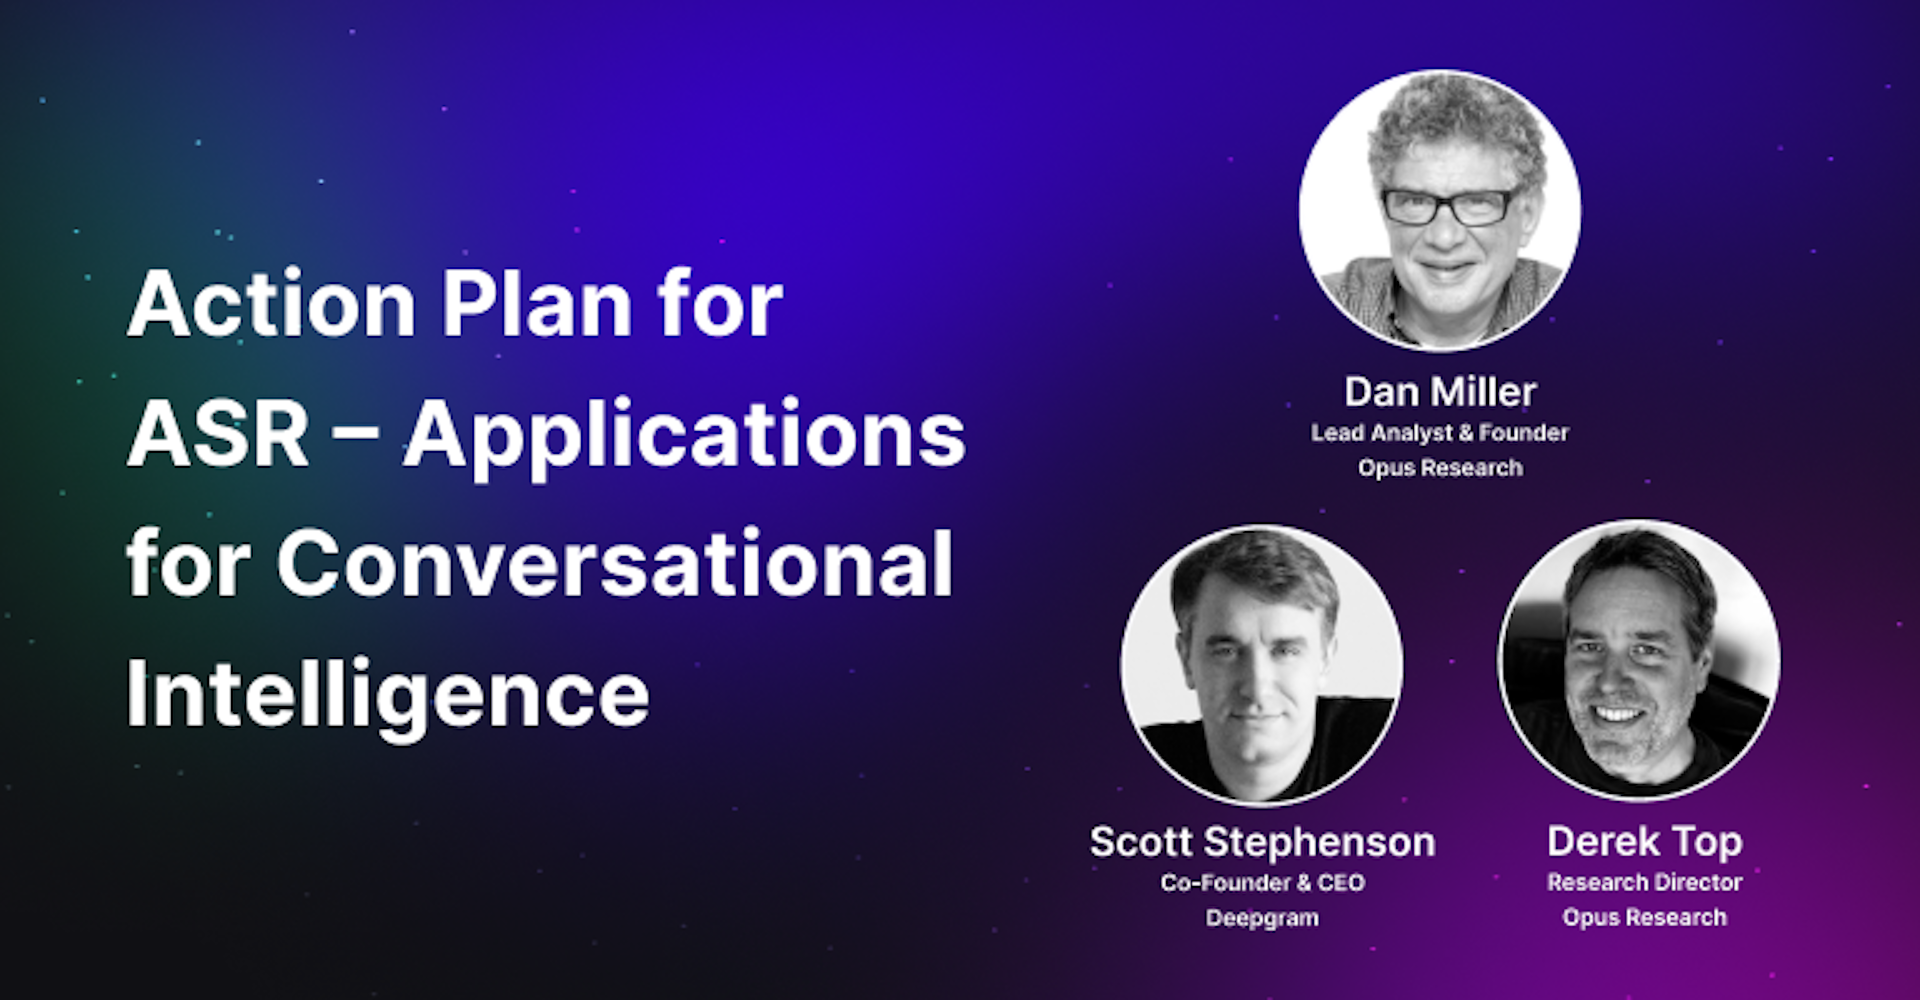 Action Plan for ASR – Applications for Conversational Intelligence